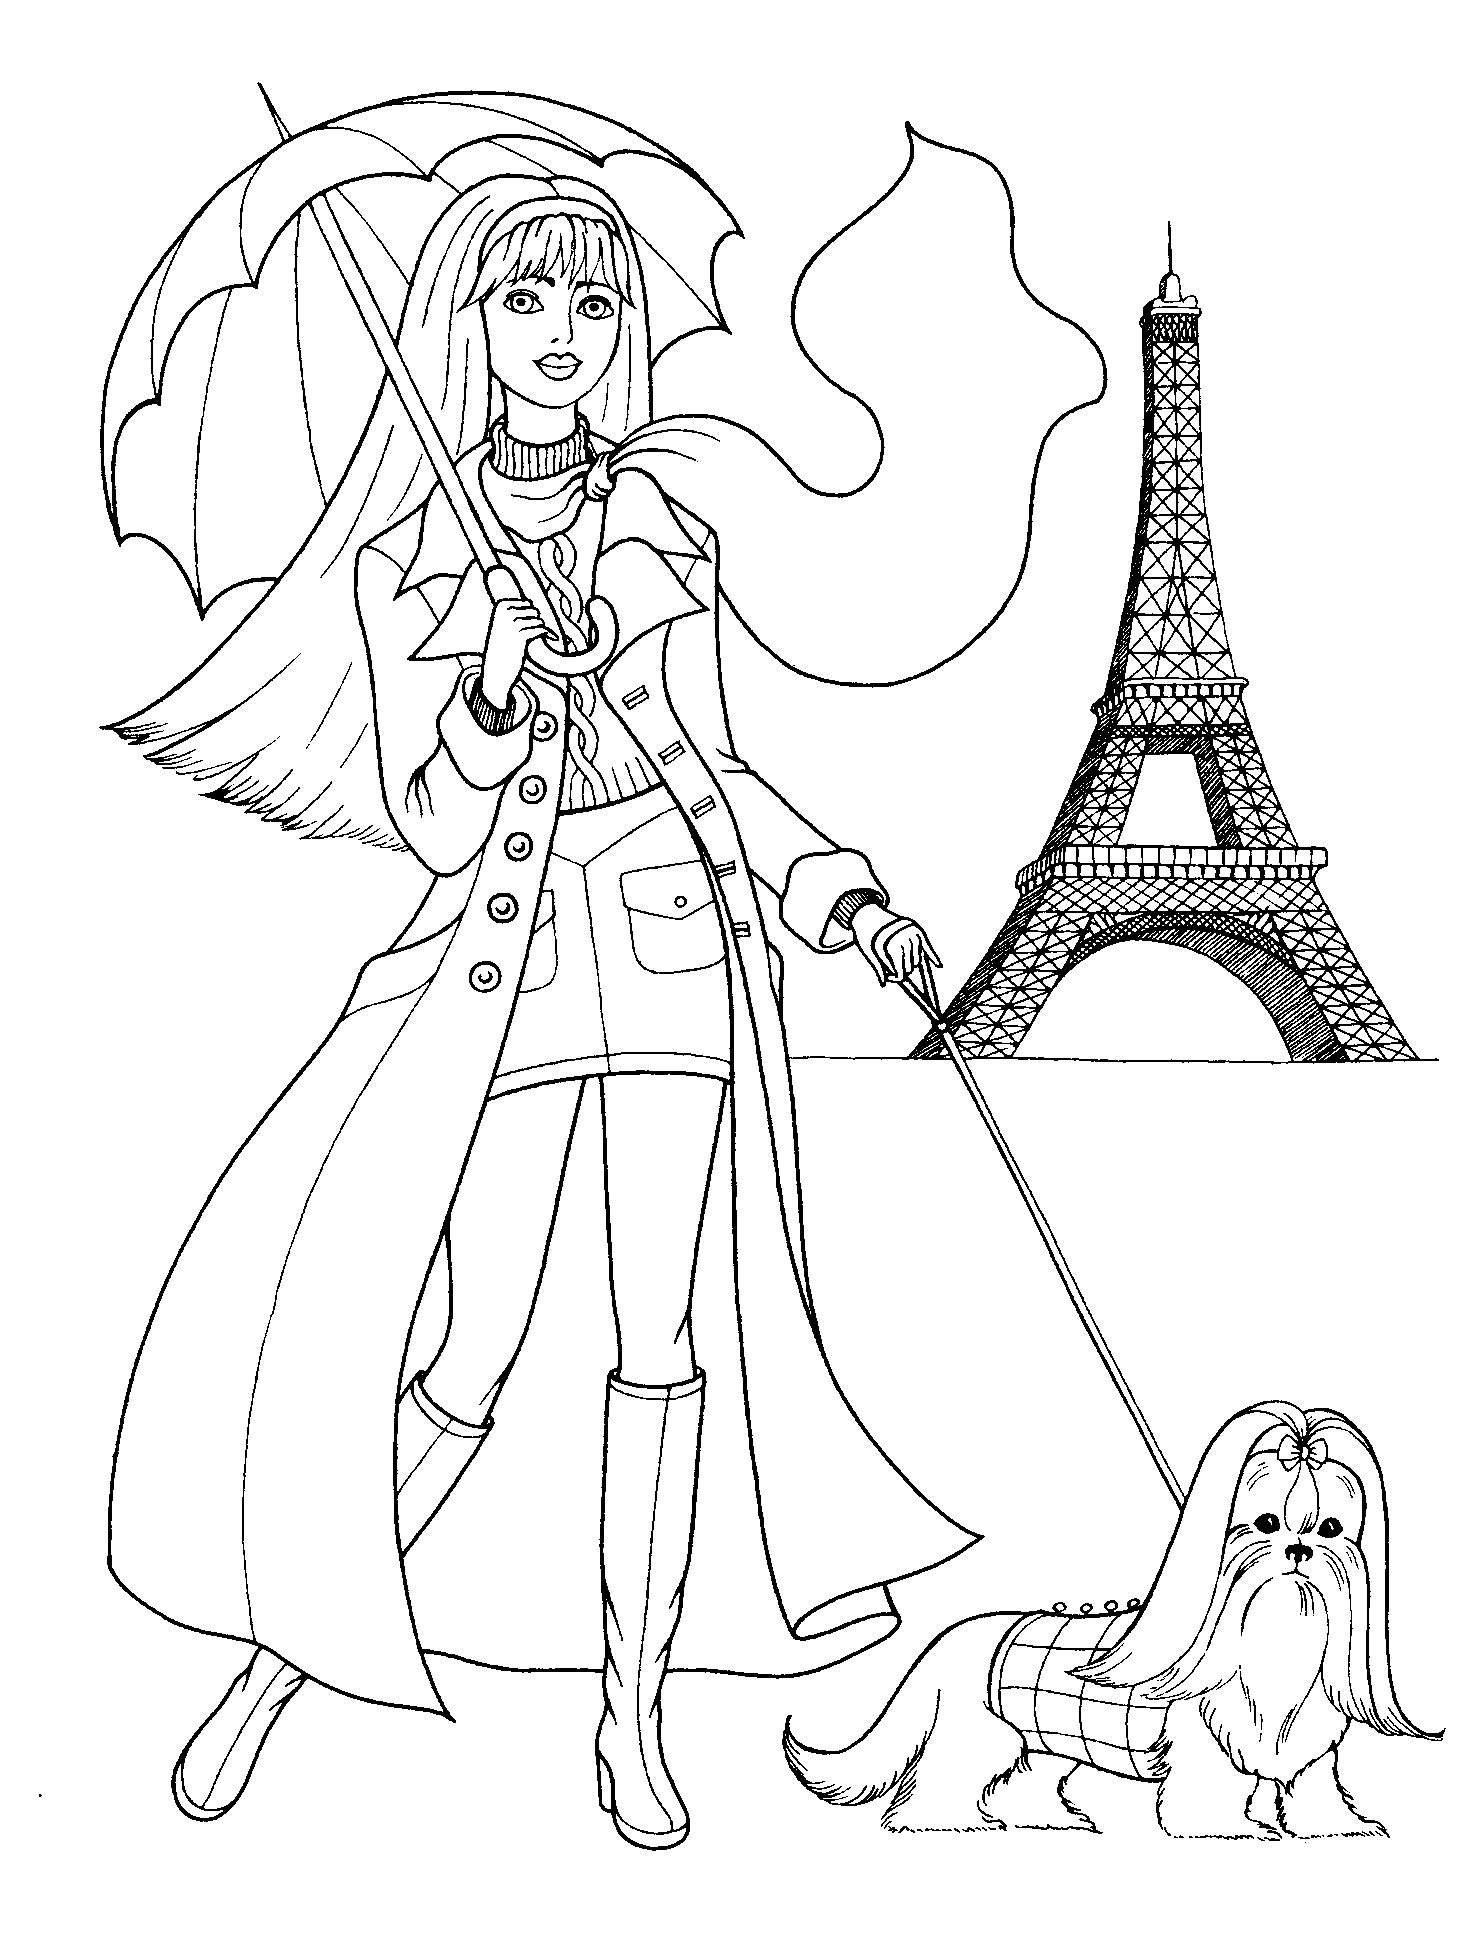 Coloring Pages Fashion Boys
 Coloring Pages For Teenagers Printable Free Image 4